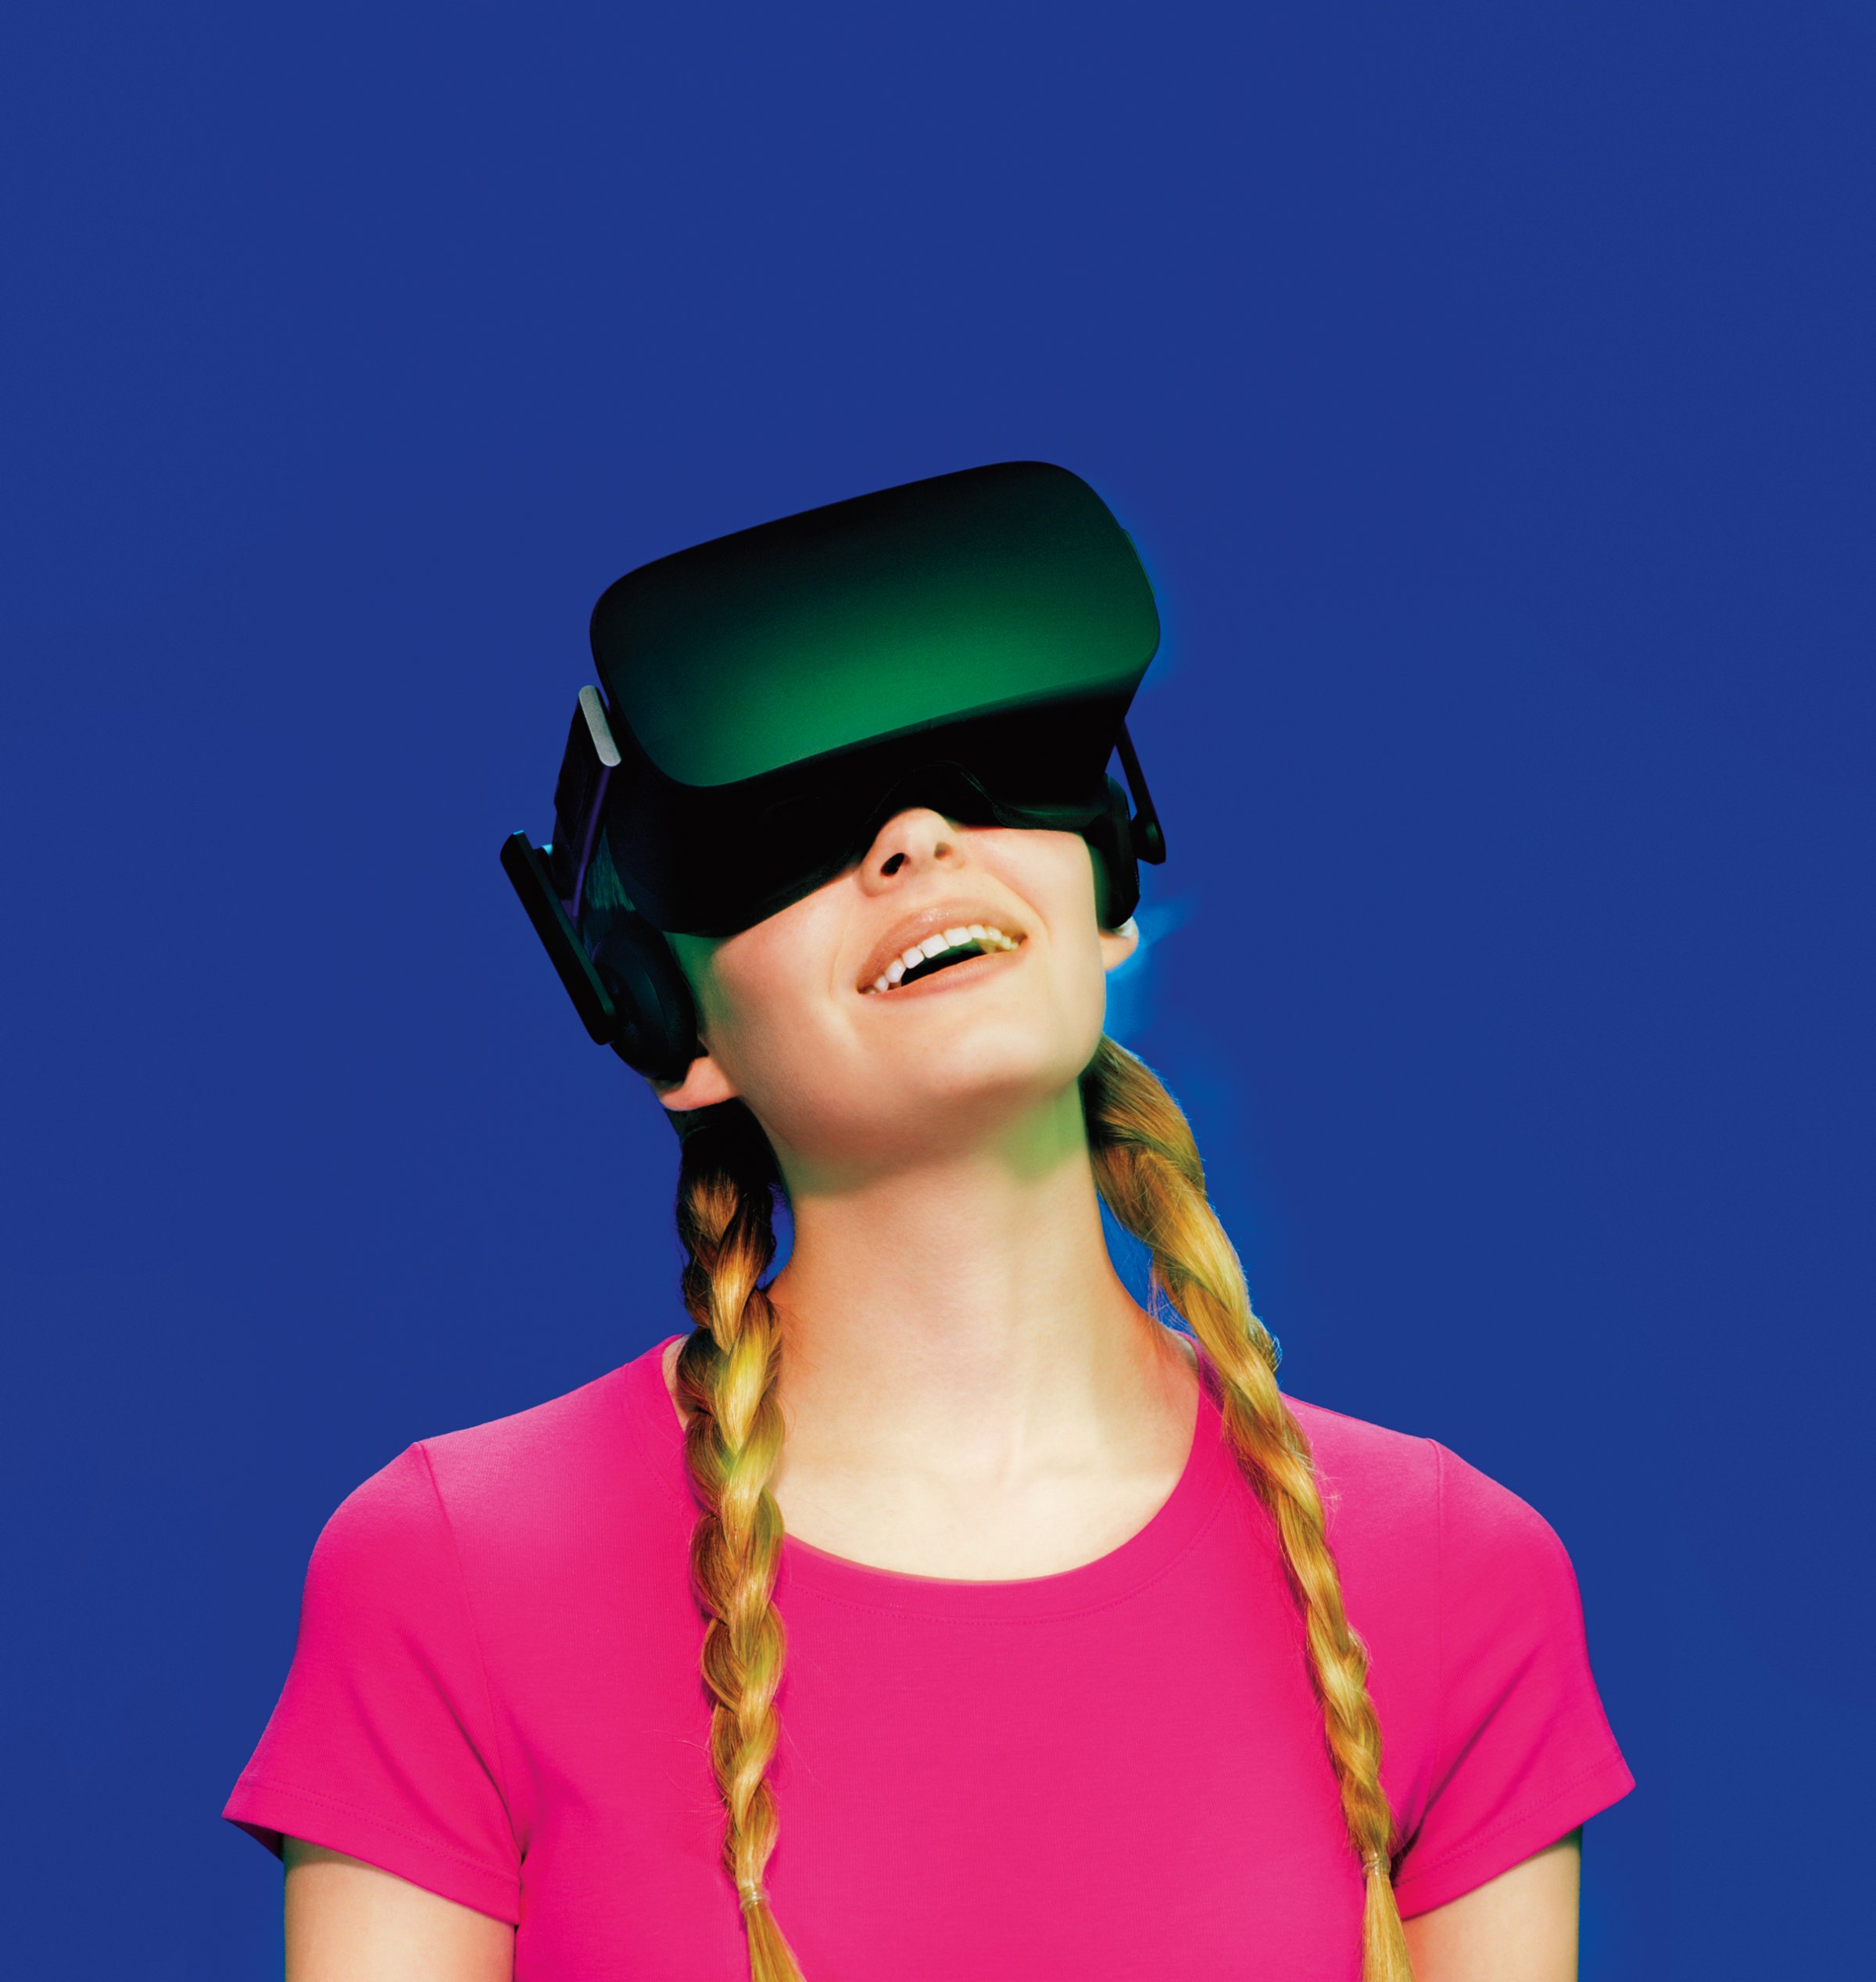 A young woman wearing Oculus Rift virtual reality goggles